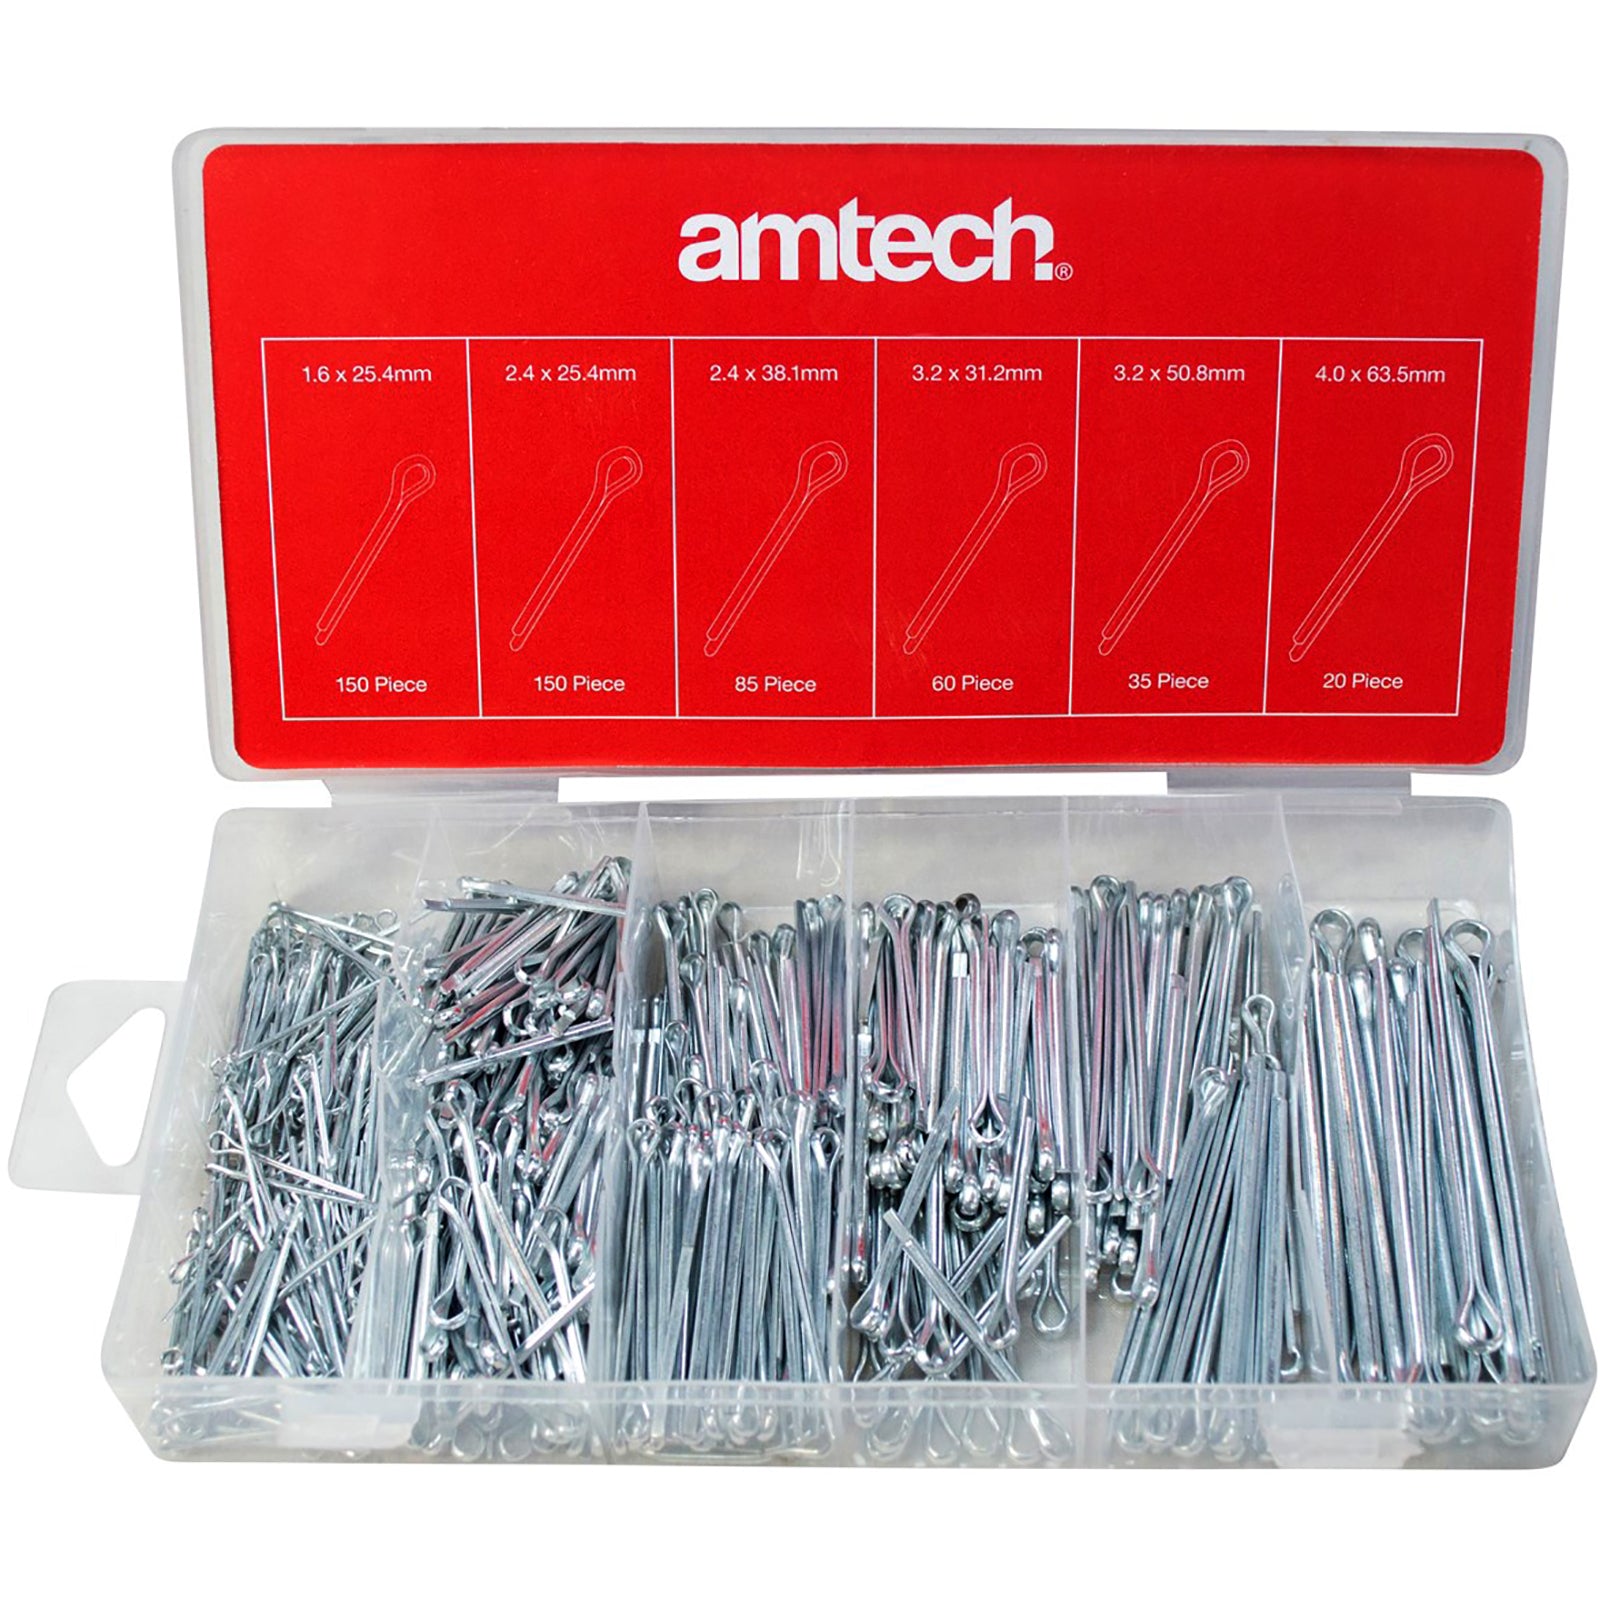 Amtech 500 Piece Cotter Pin Assortment in Storage Case